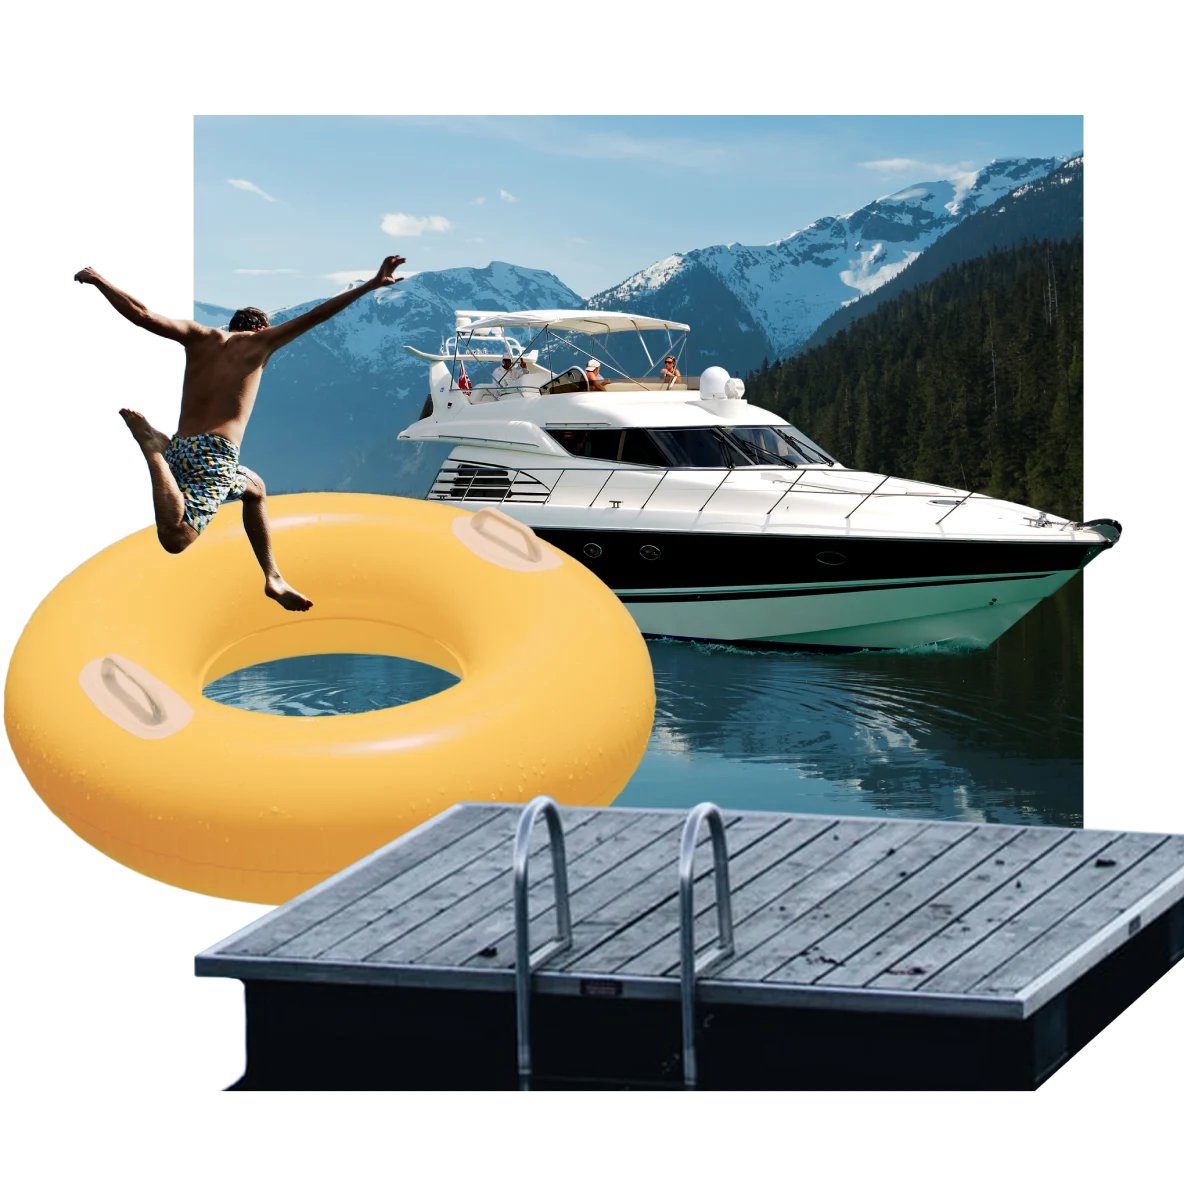 Collage of lake-themed items: Boat at center on a steel-blue lake with dock in the foreground. Swimmer jumps inside a large yellow donut floatie. Snow-capped mountains in the background.